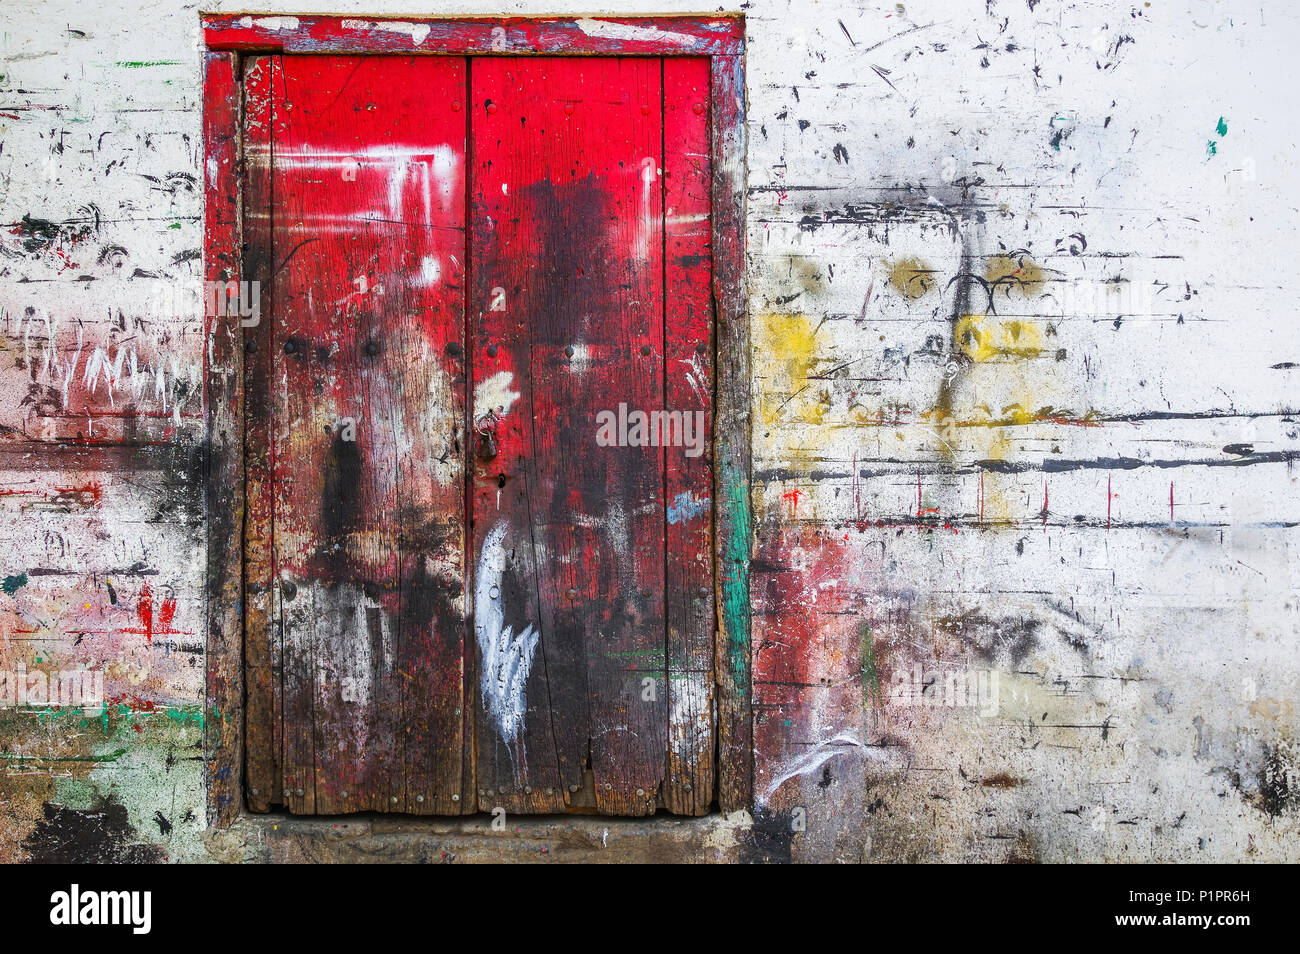 Red wooden doors and wall splattered with multiple paint colours; Nicaragua Stock Photo